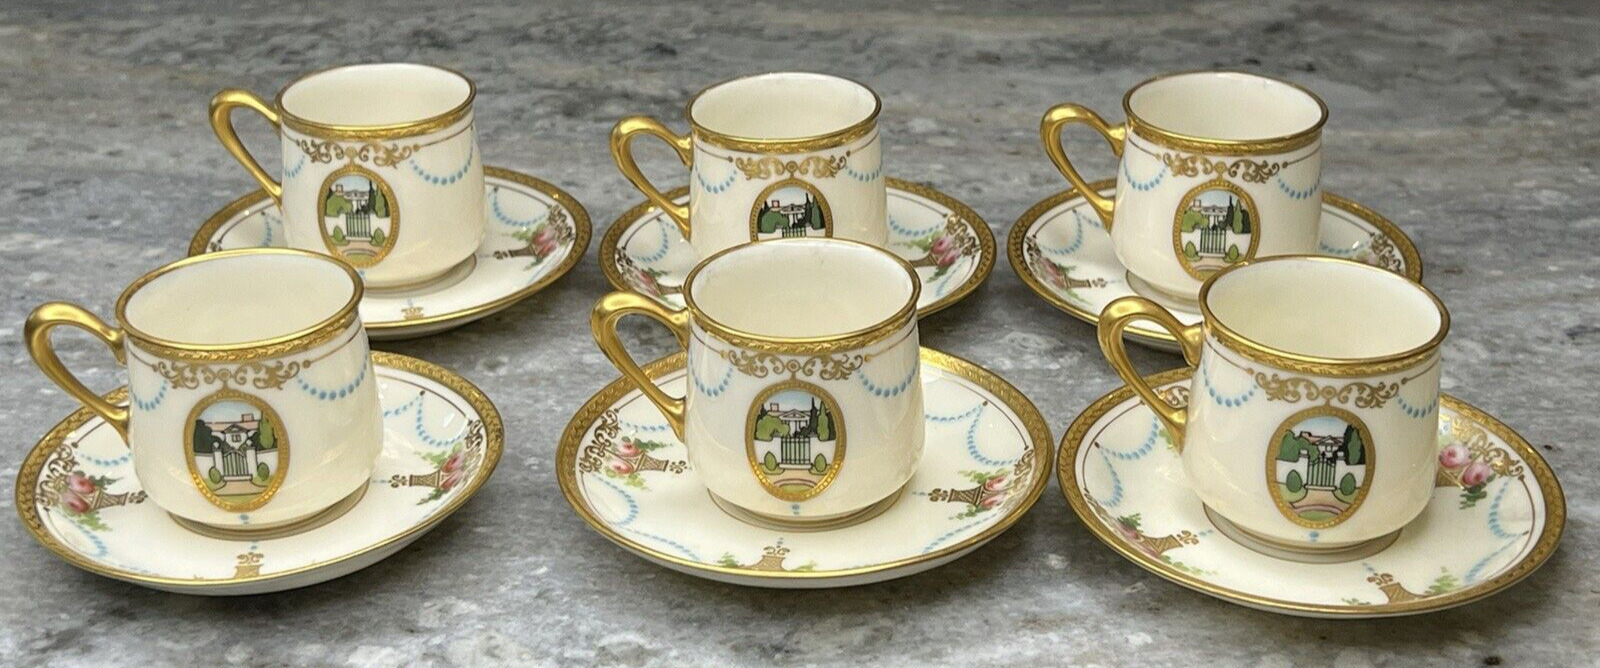 Lenox The Virginian Decoration 6 Demitasse After Dinner Coffee Cup & Saucer Sets